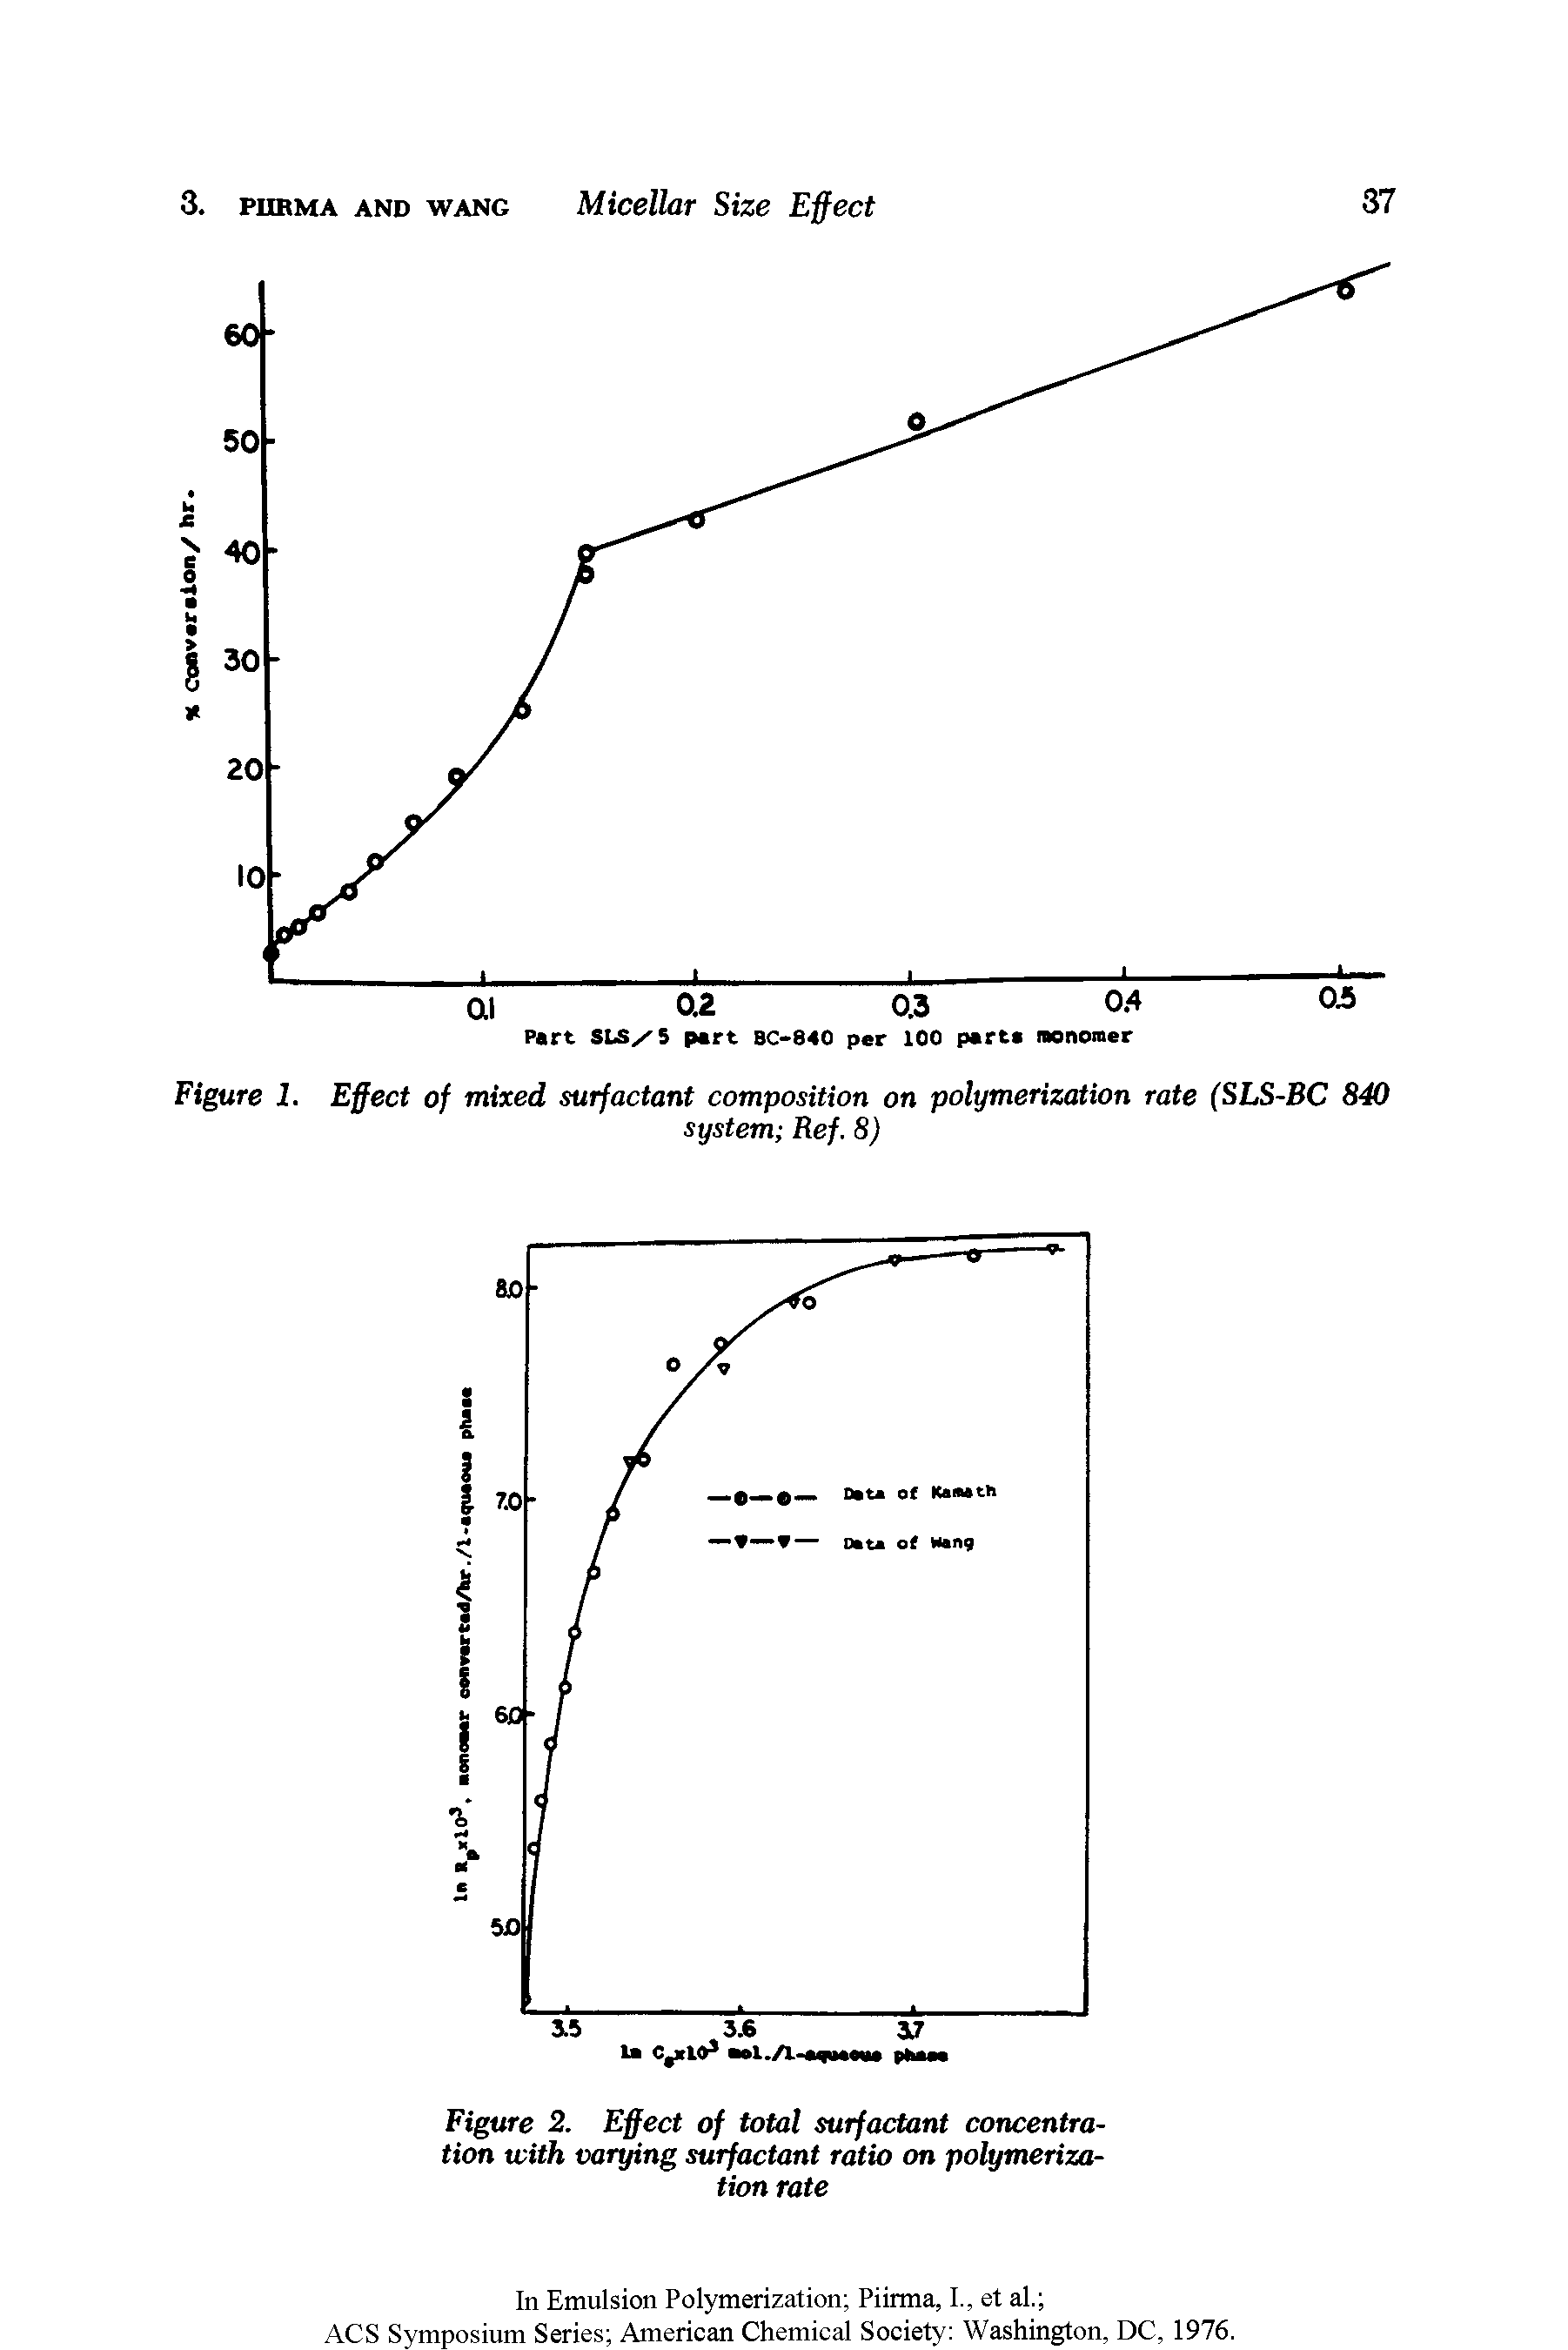 Figure 2. Effect of total surfactant concentration with varying surfactant ratio on polymerization rate...